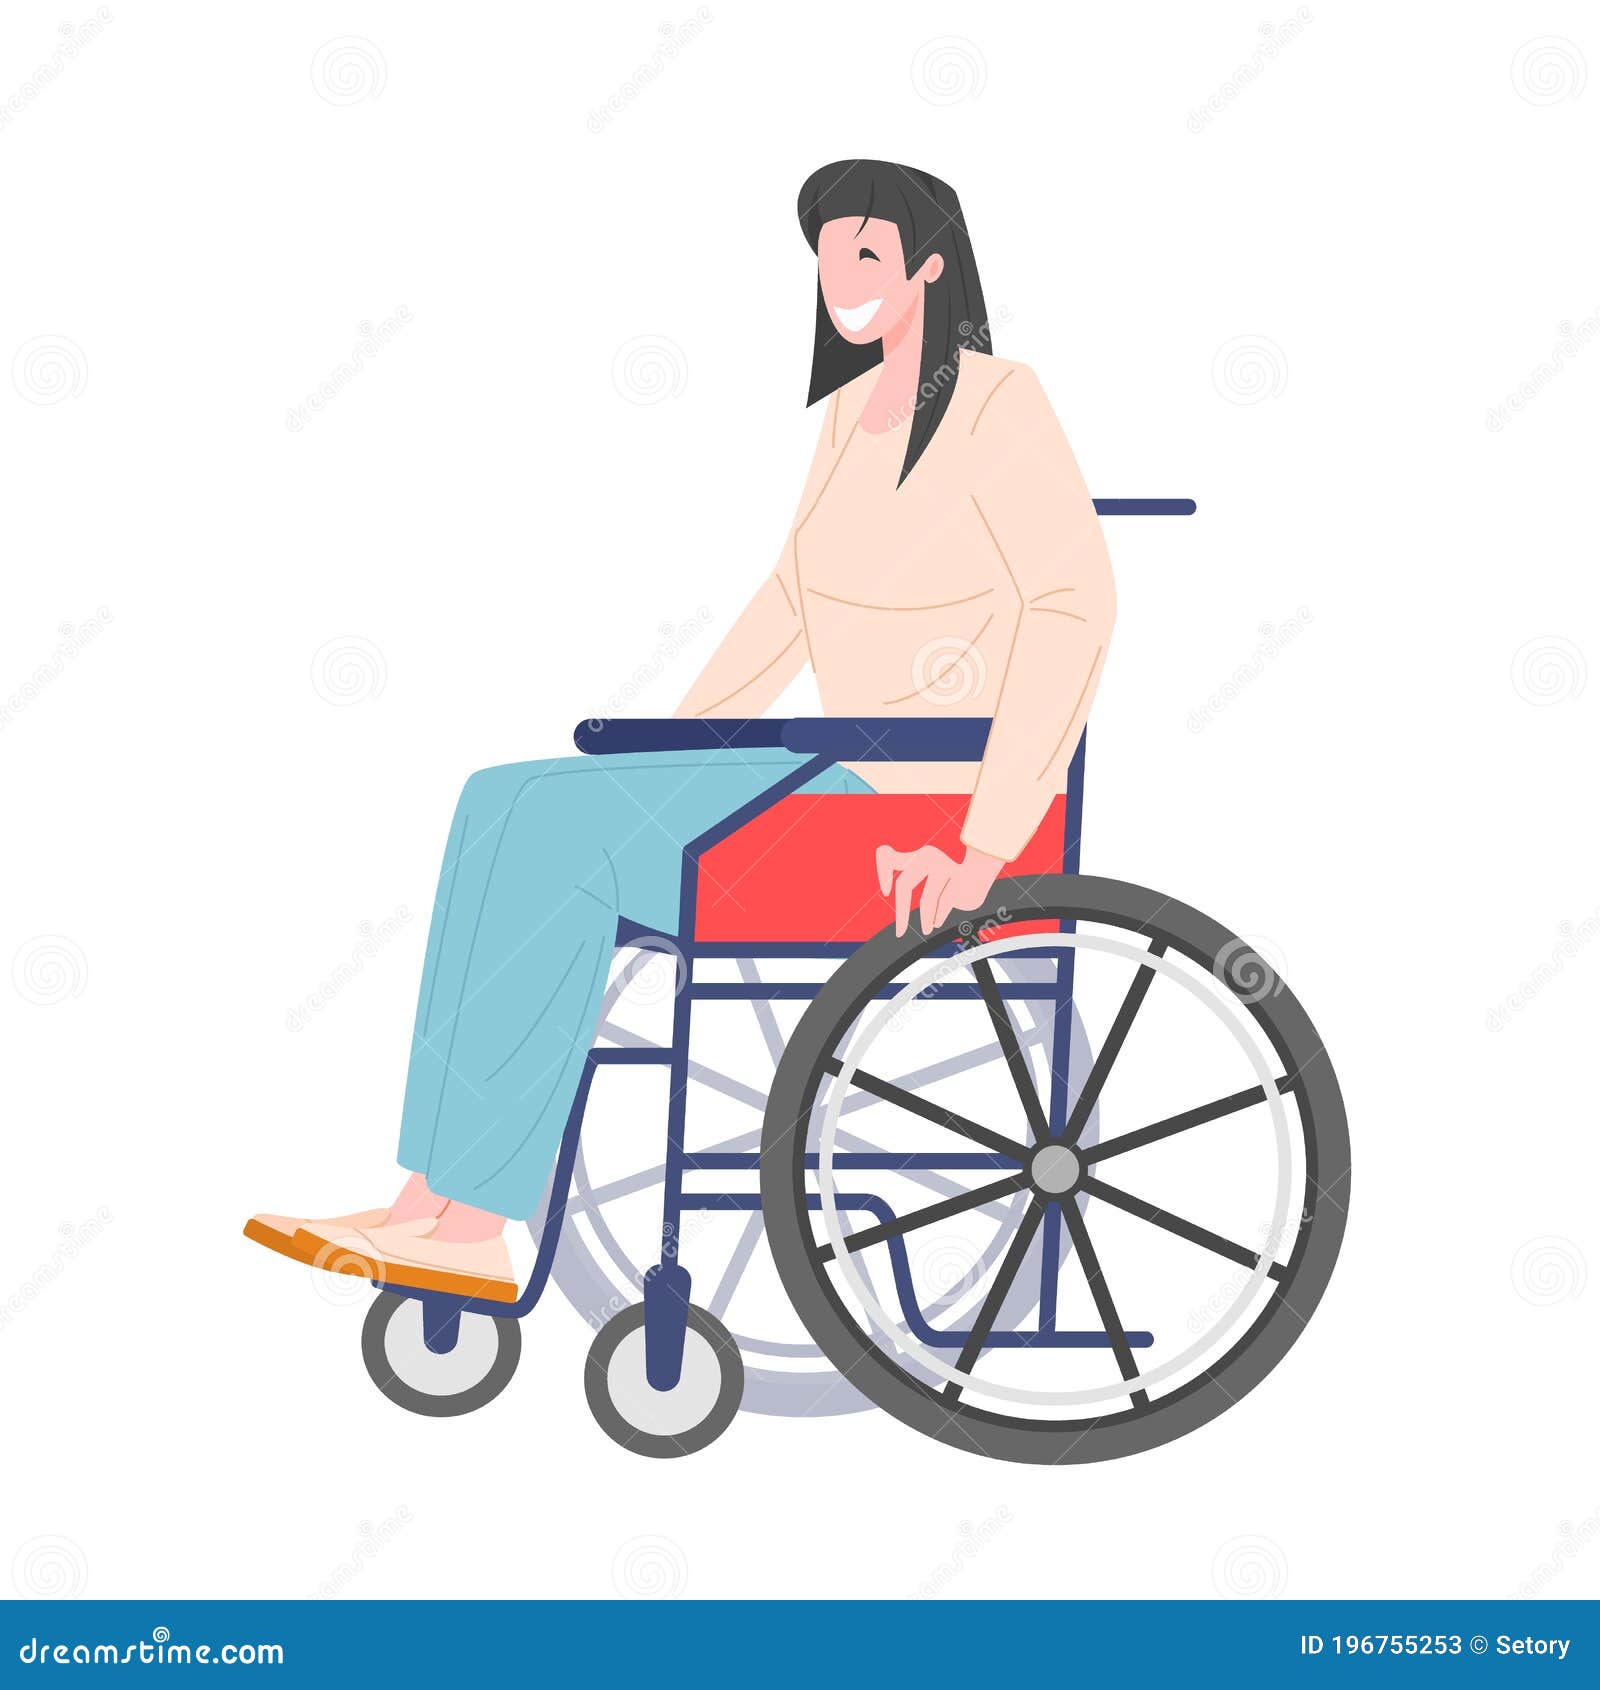 Woman in a wheelchair stock vector. Illustration of girl - 196755253